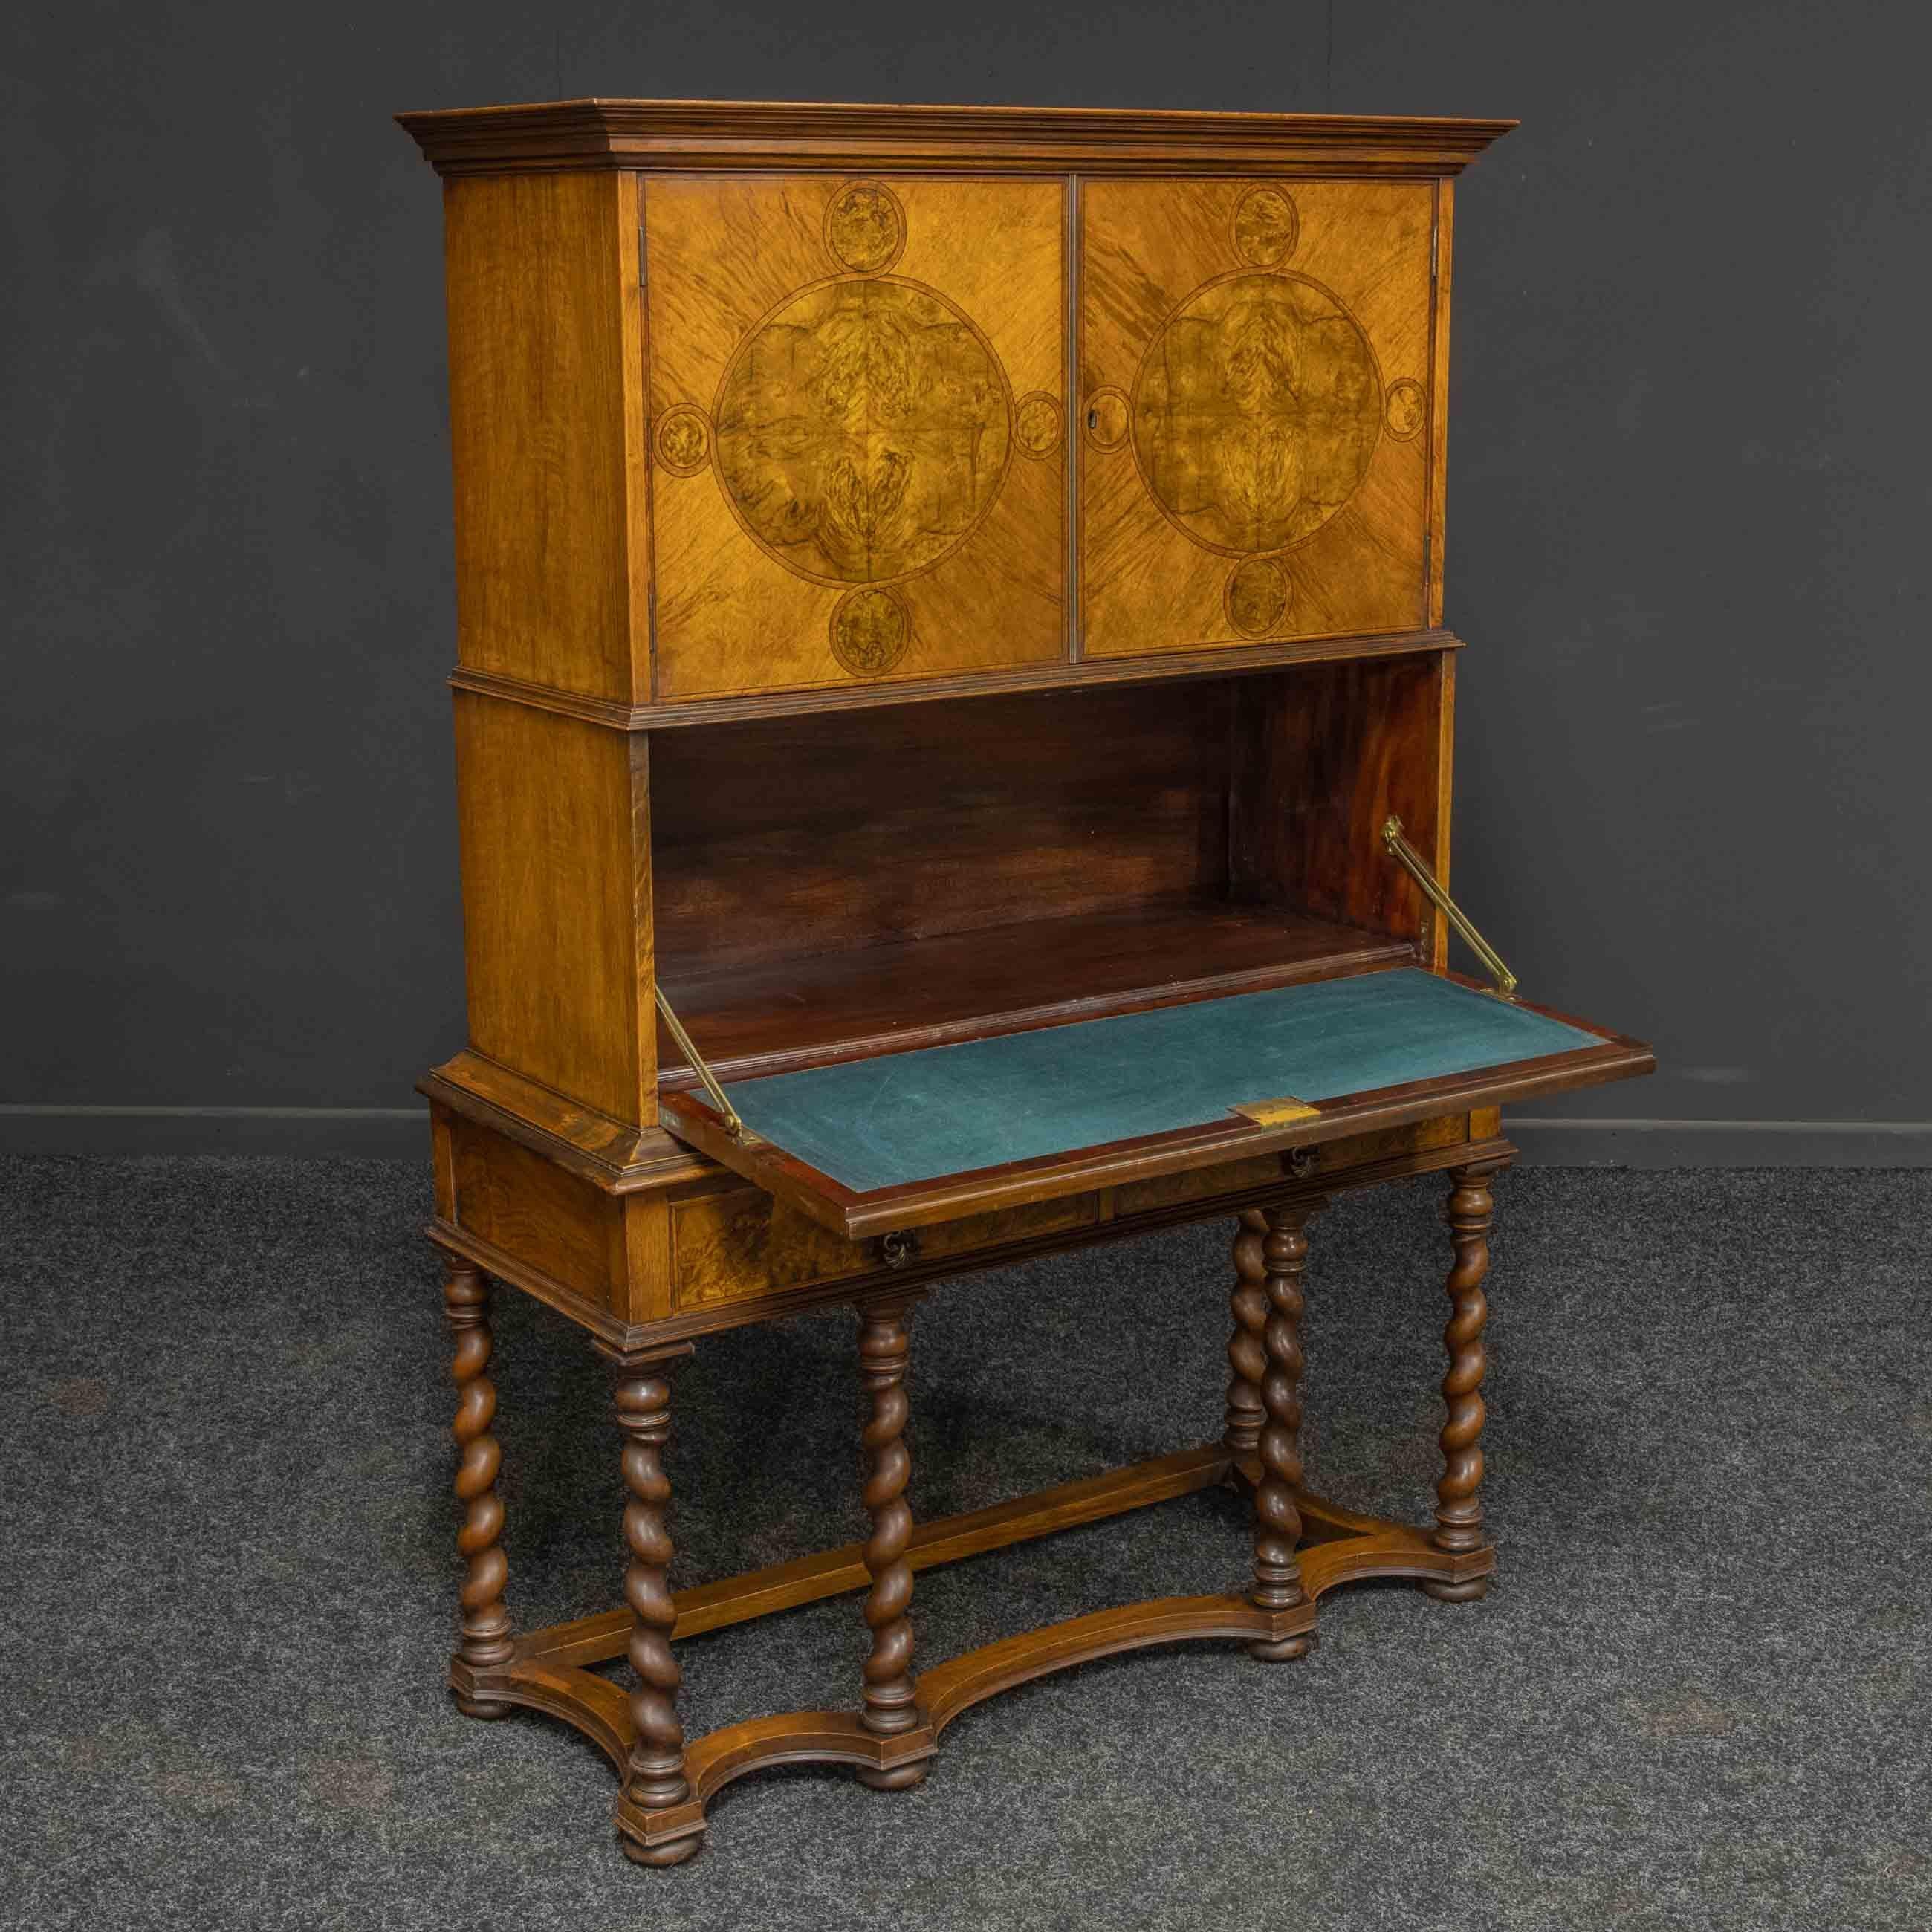 A superb early 20th Century decorative walnut veneered secretaire cabinet in the style of William and Mary. The stretchered base supports six barley twist legs that terminate on small bun feet above these are two mahogany lined drawers that have